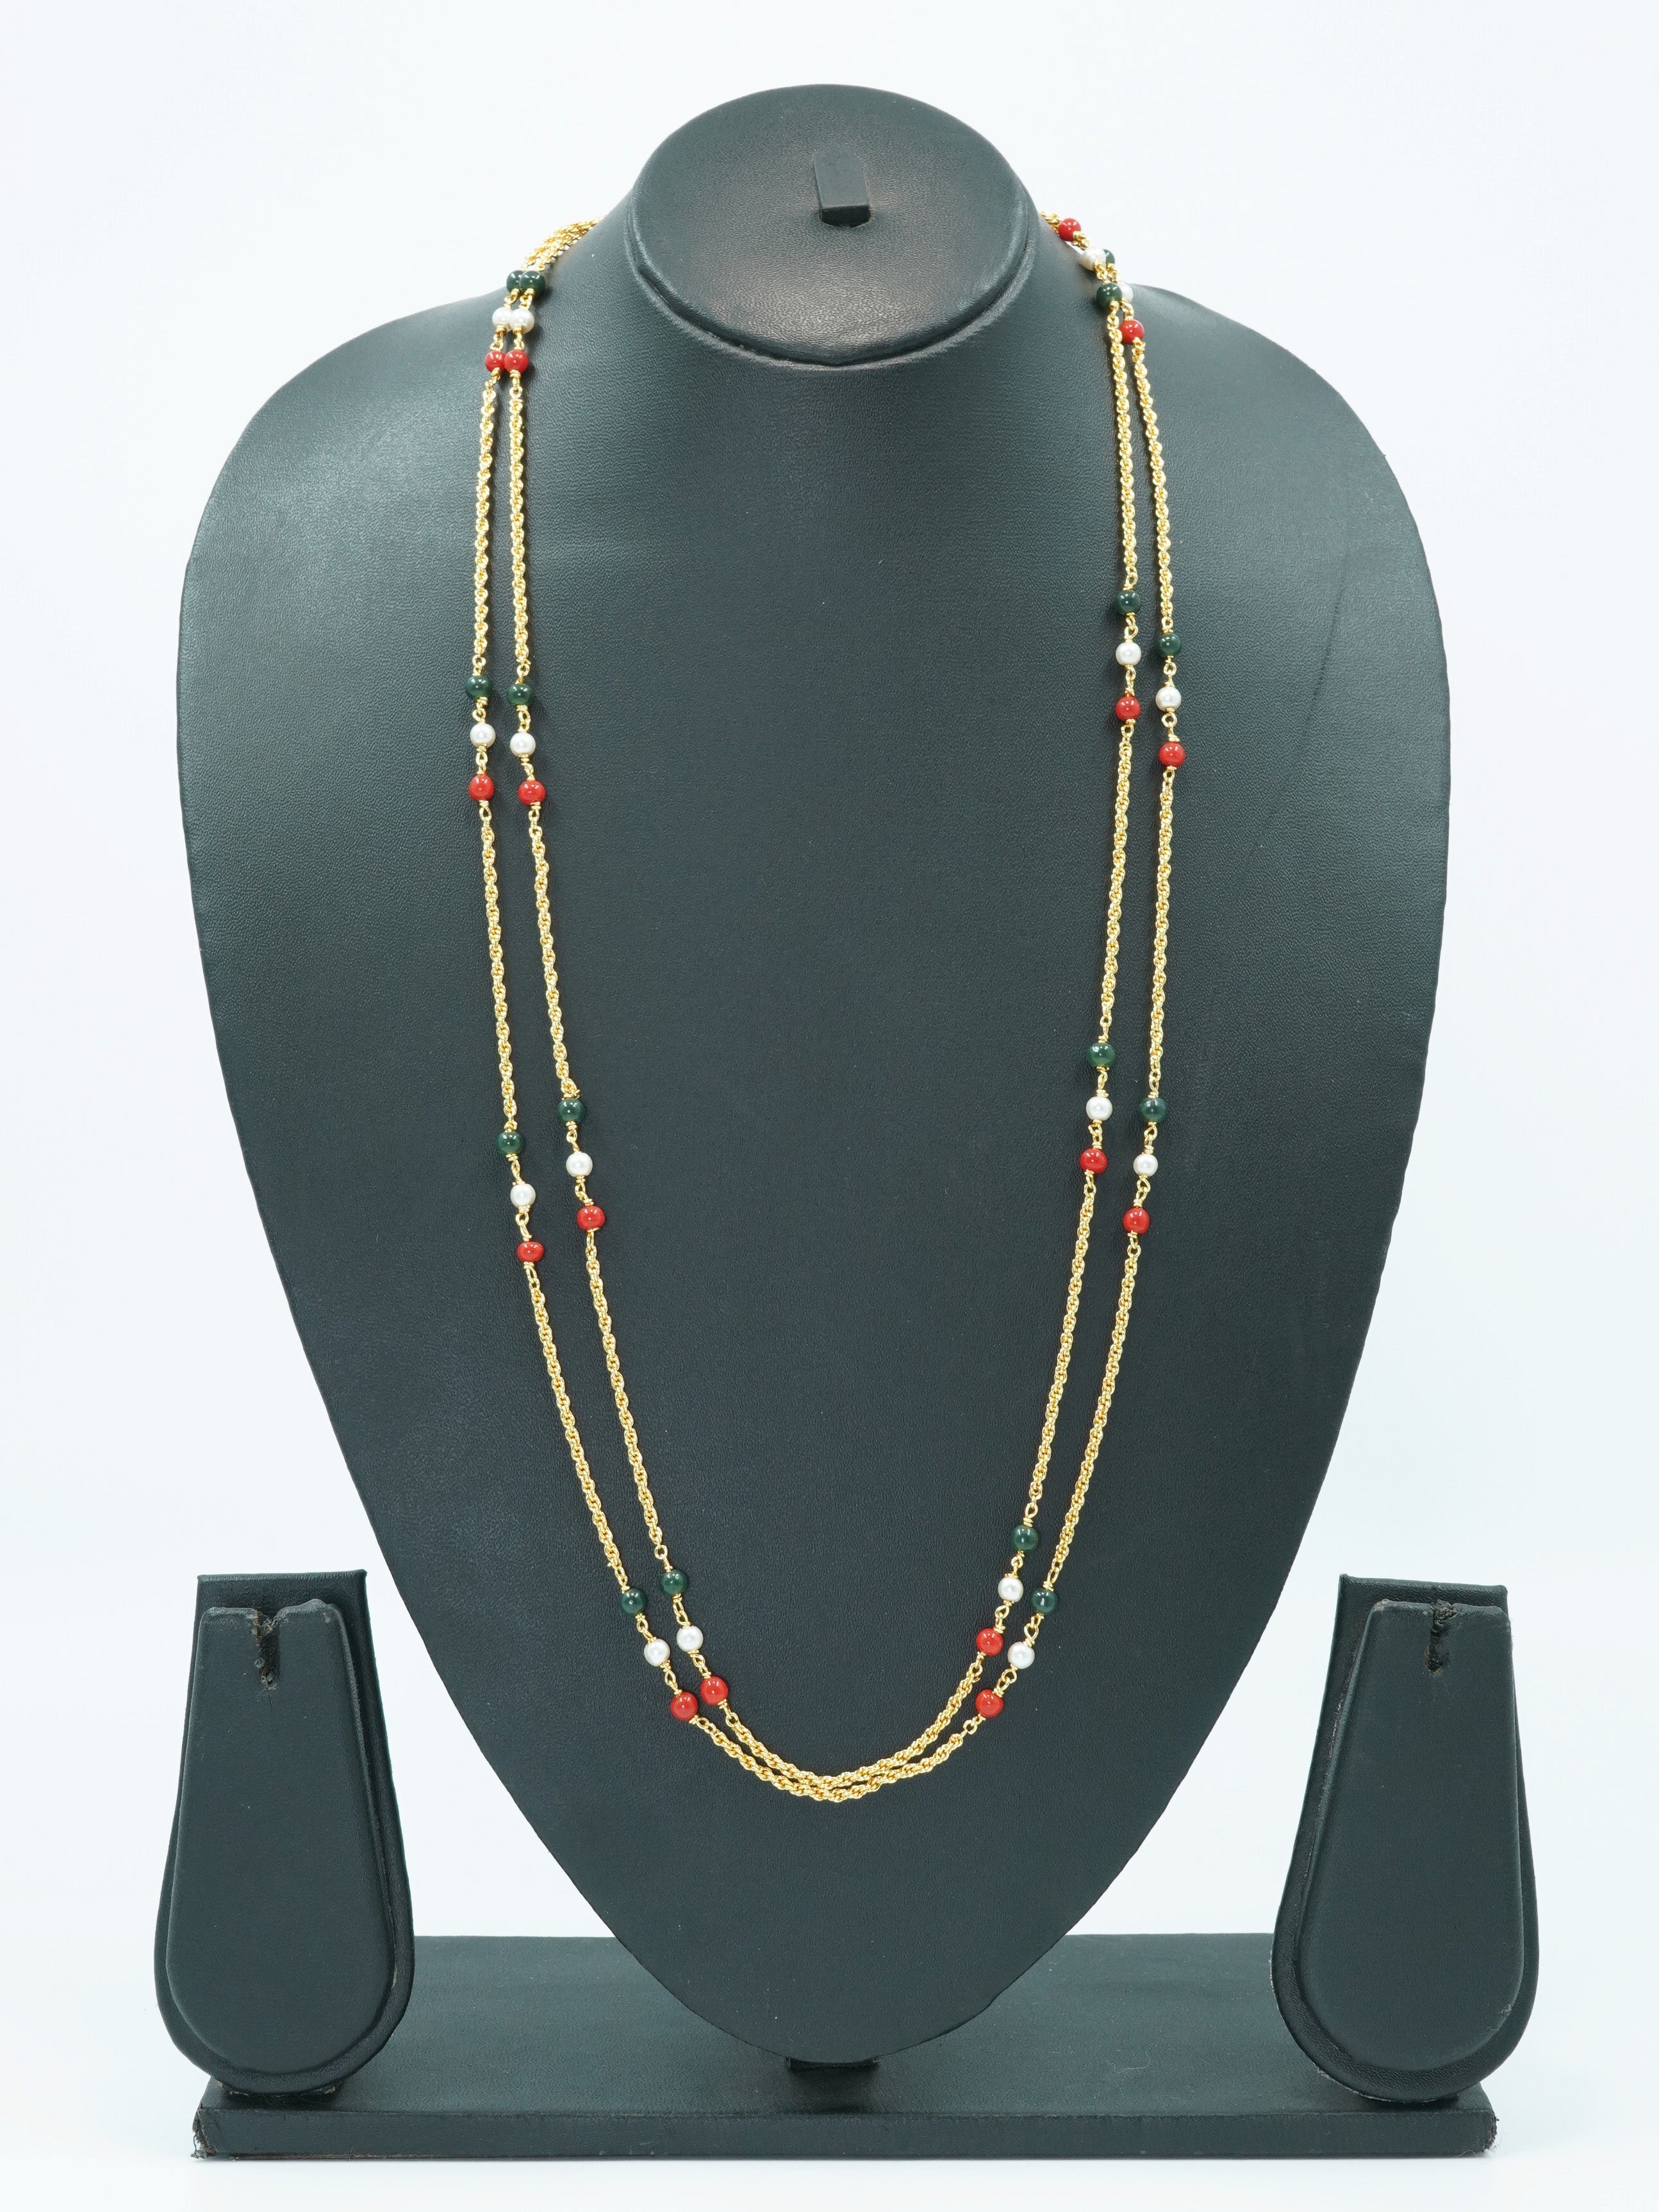 1 gm Micro gold plated 2 Line designer 30 inches chain with Multicolor beads 10652N